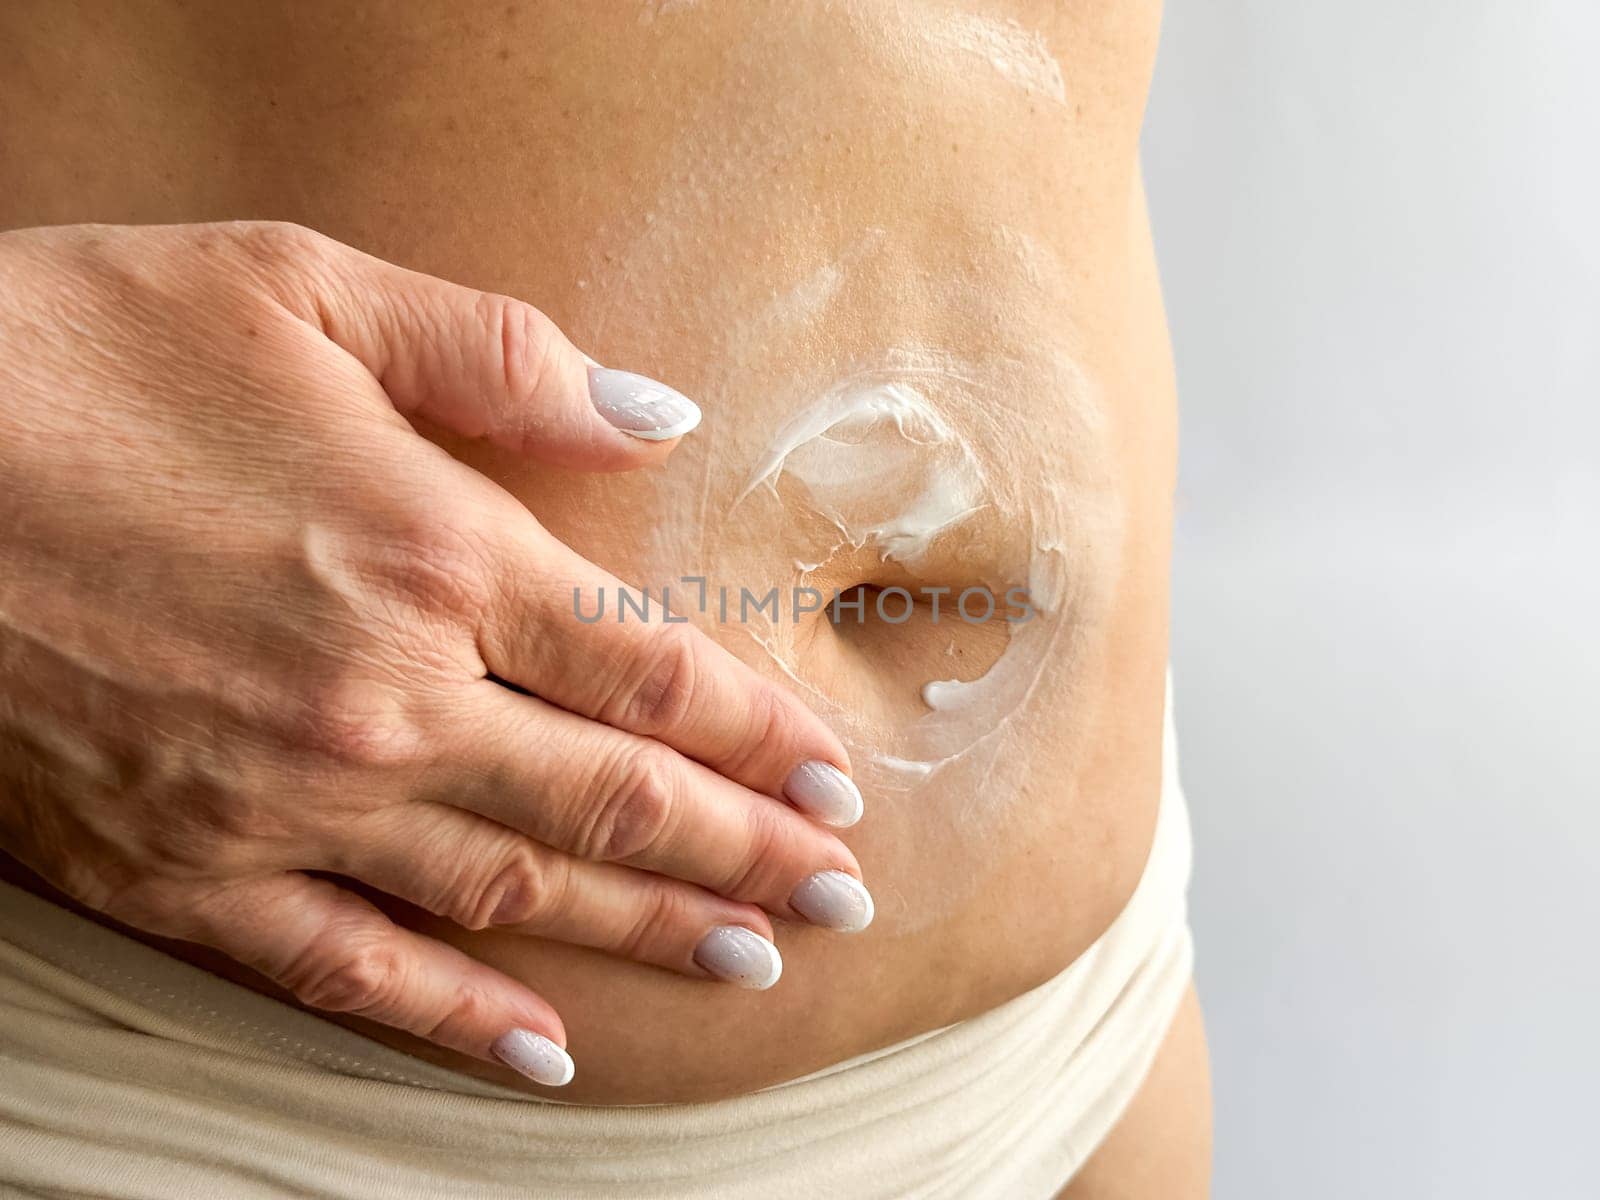 Close up of womans hand with white manicured nails applying cream to her stomach. Highlights skincare, body care, and personal hygiene, focusing on moisturizing and self care routines. High quality